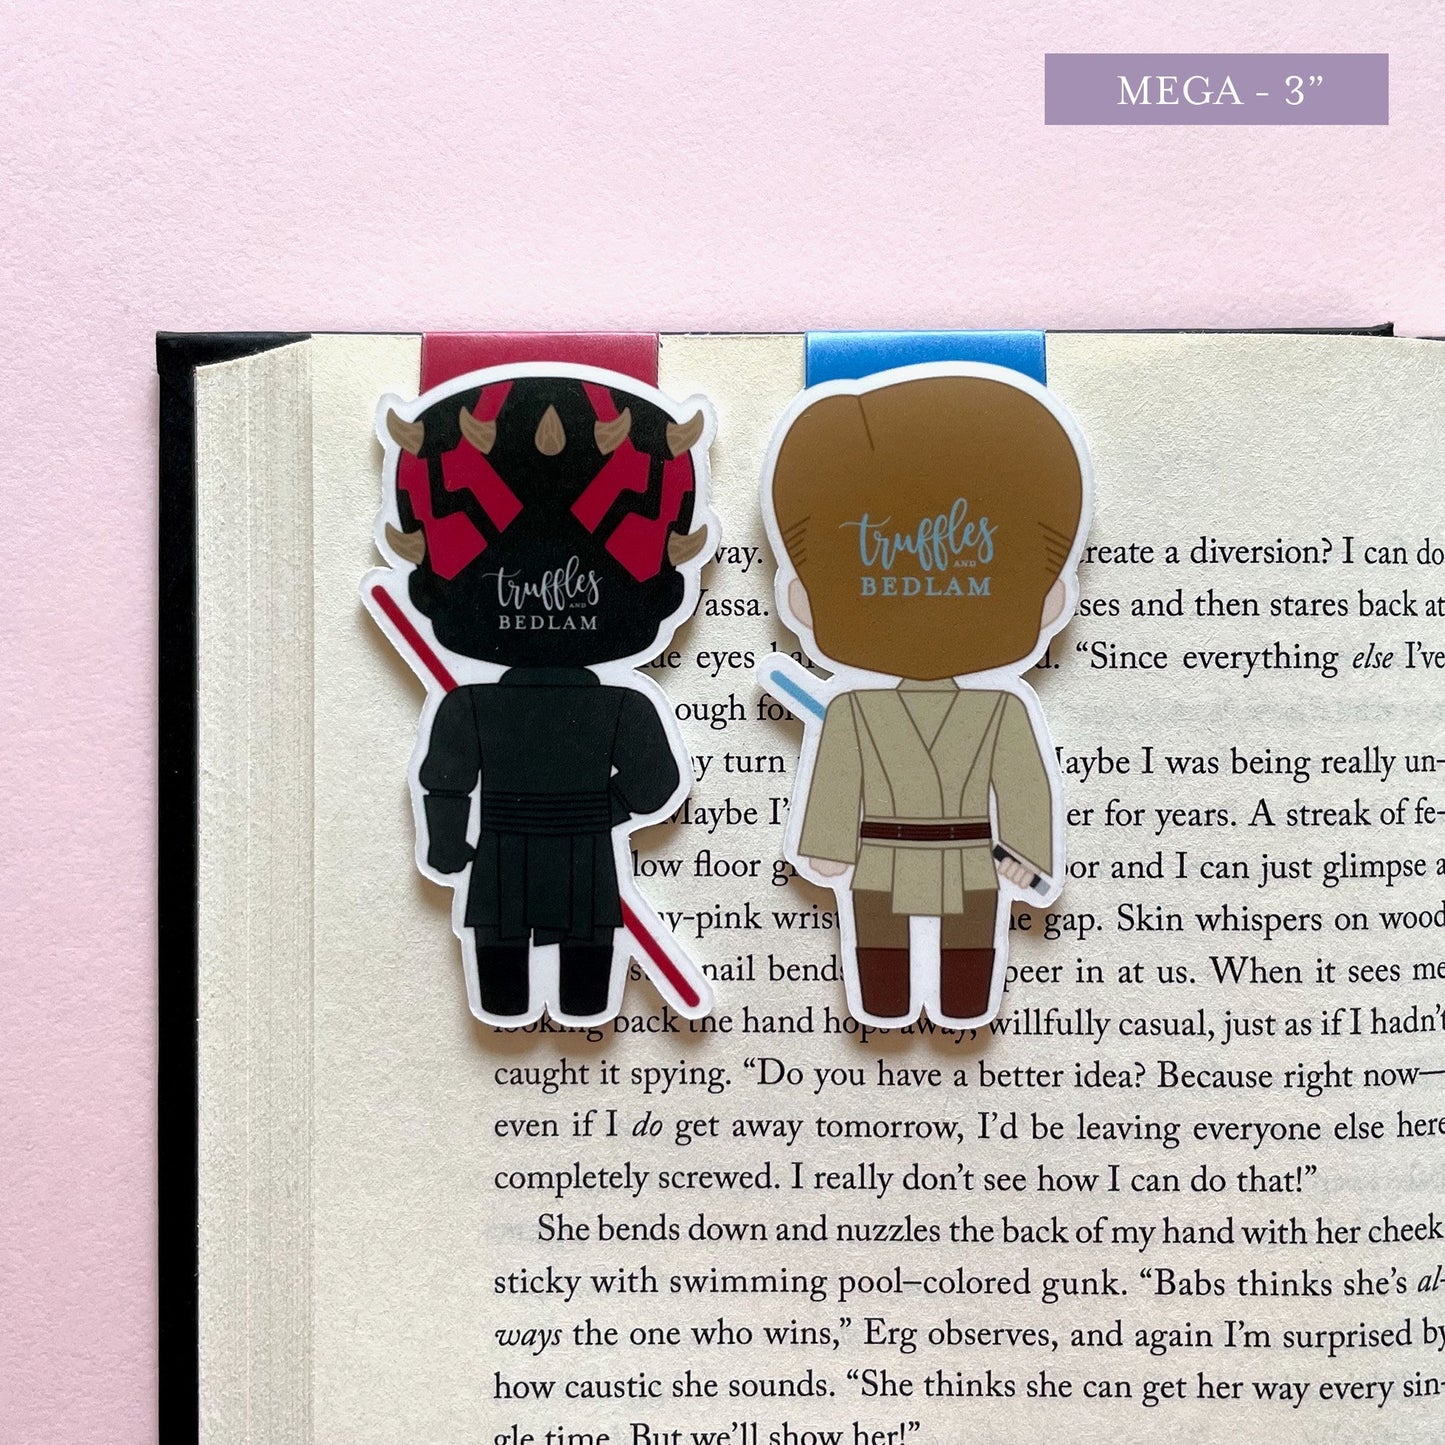 Space Wizards "Obi-Wan & Maul" Magnetic Bookmark Set